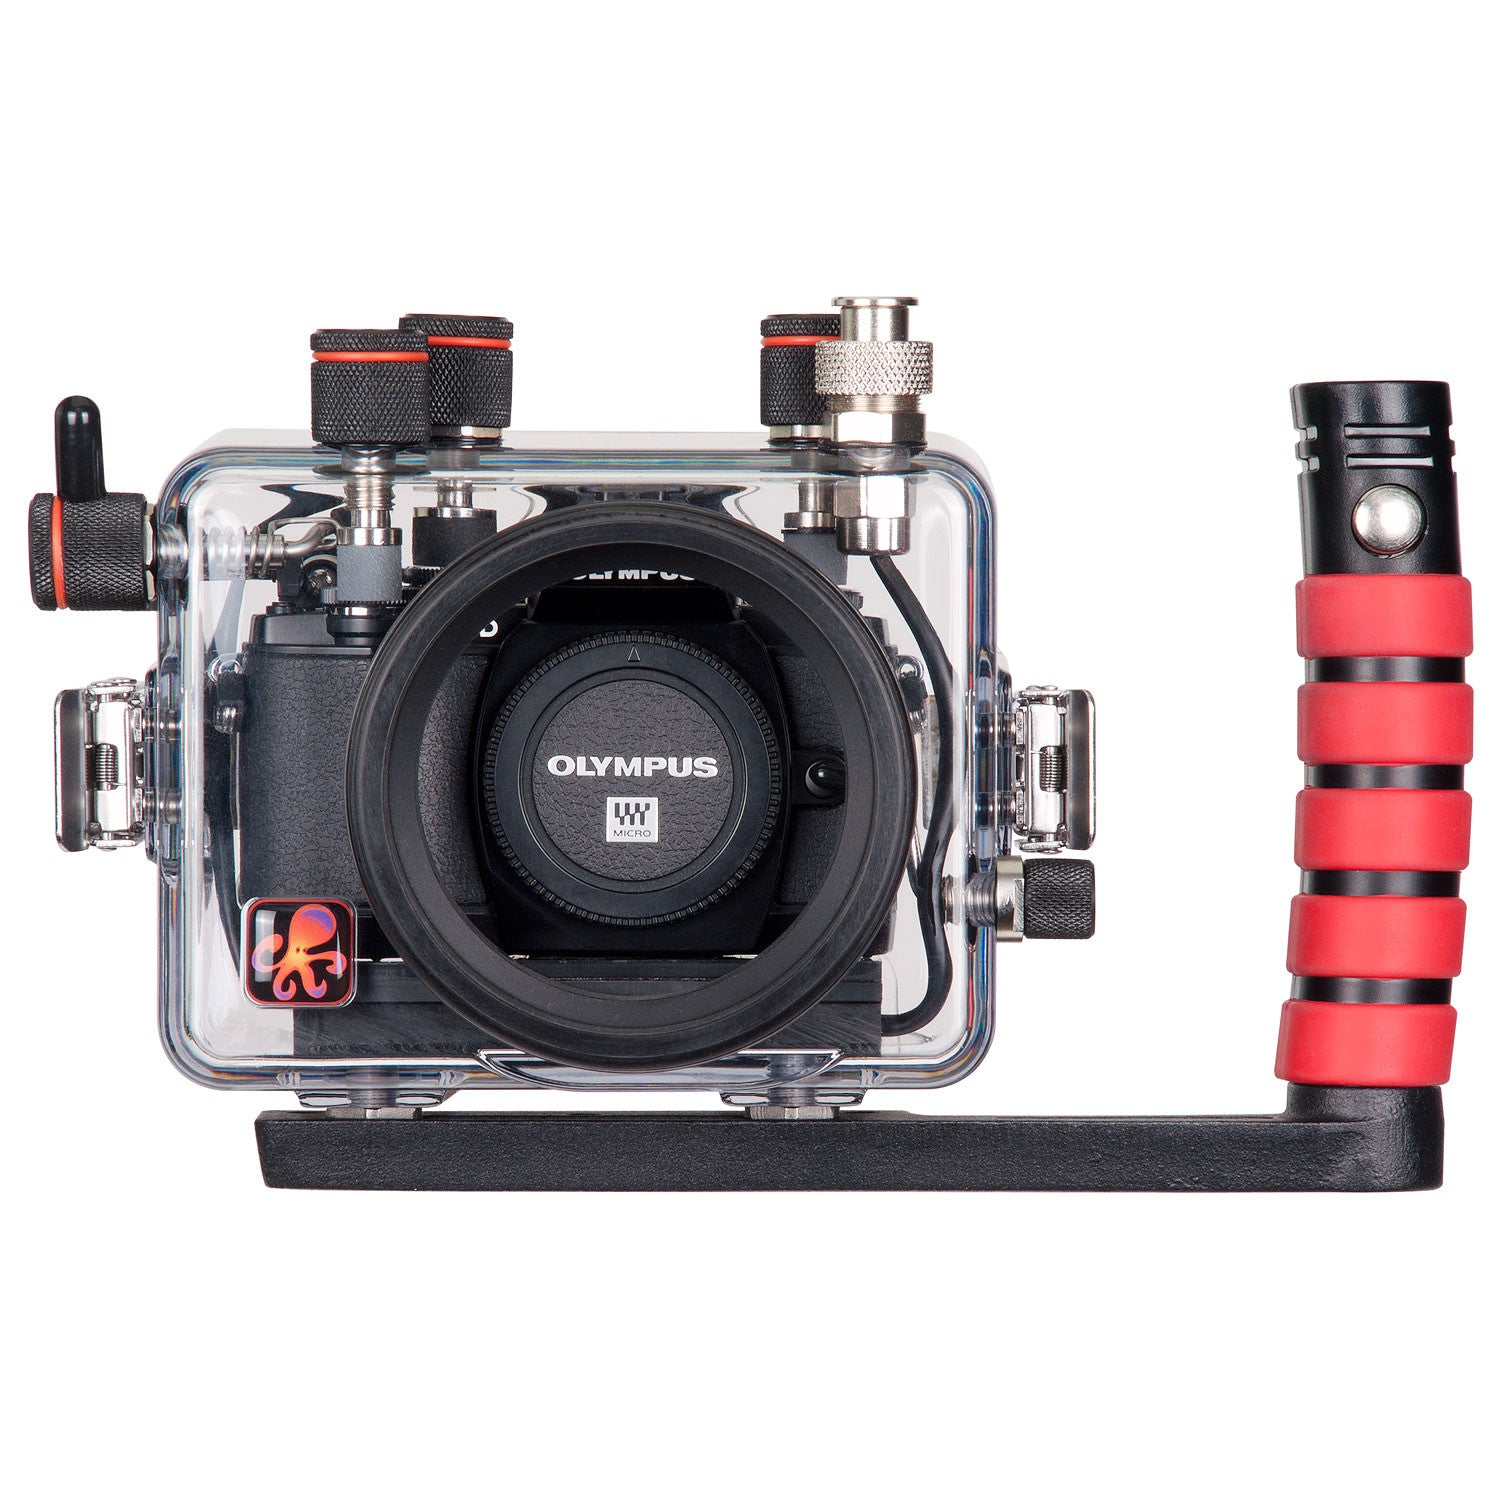 200DLM/A Underwater TTL Housing for Olympus OM-D E-M10 Mirrorless Micro Four Thirds Camera